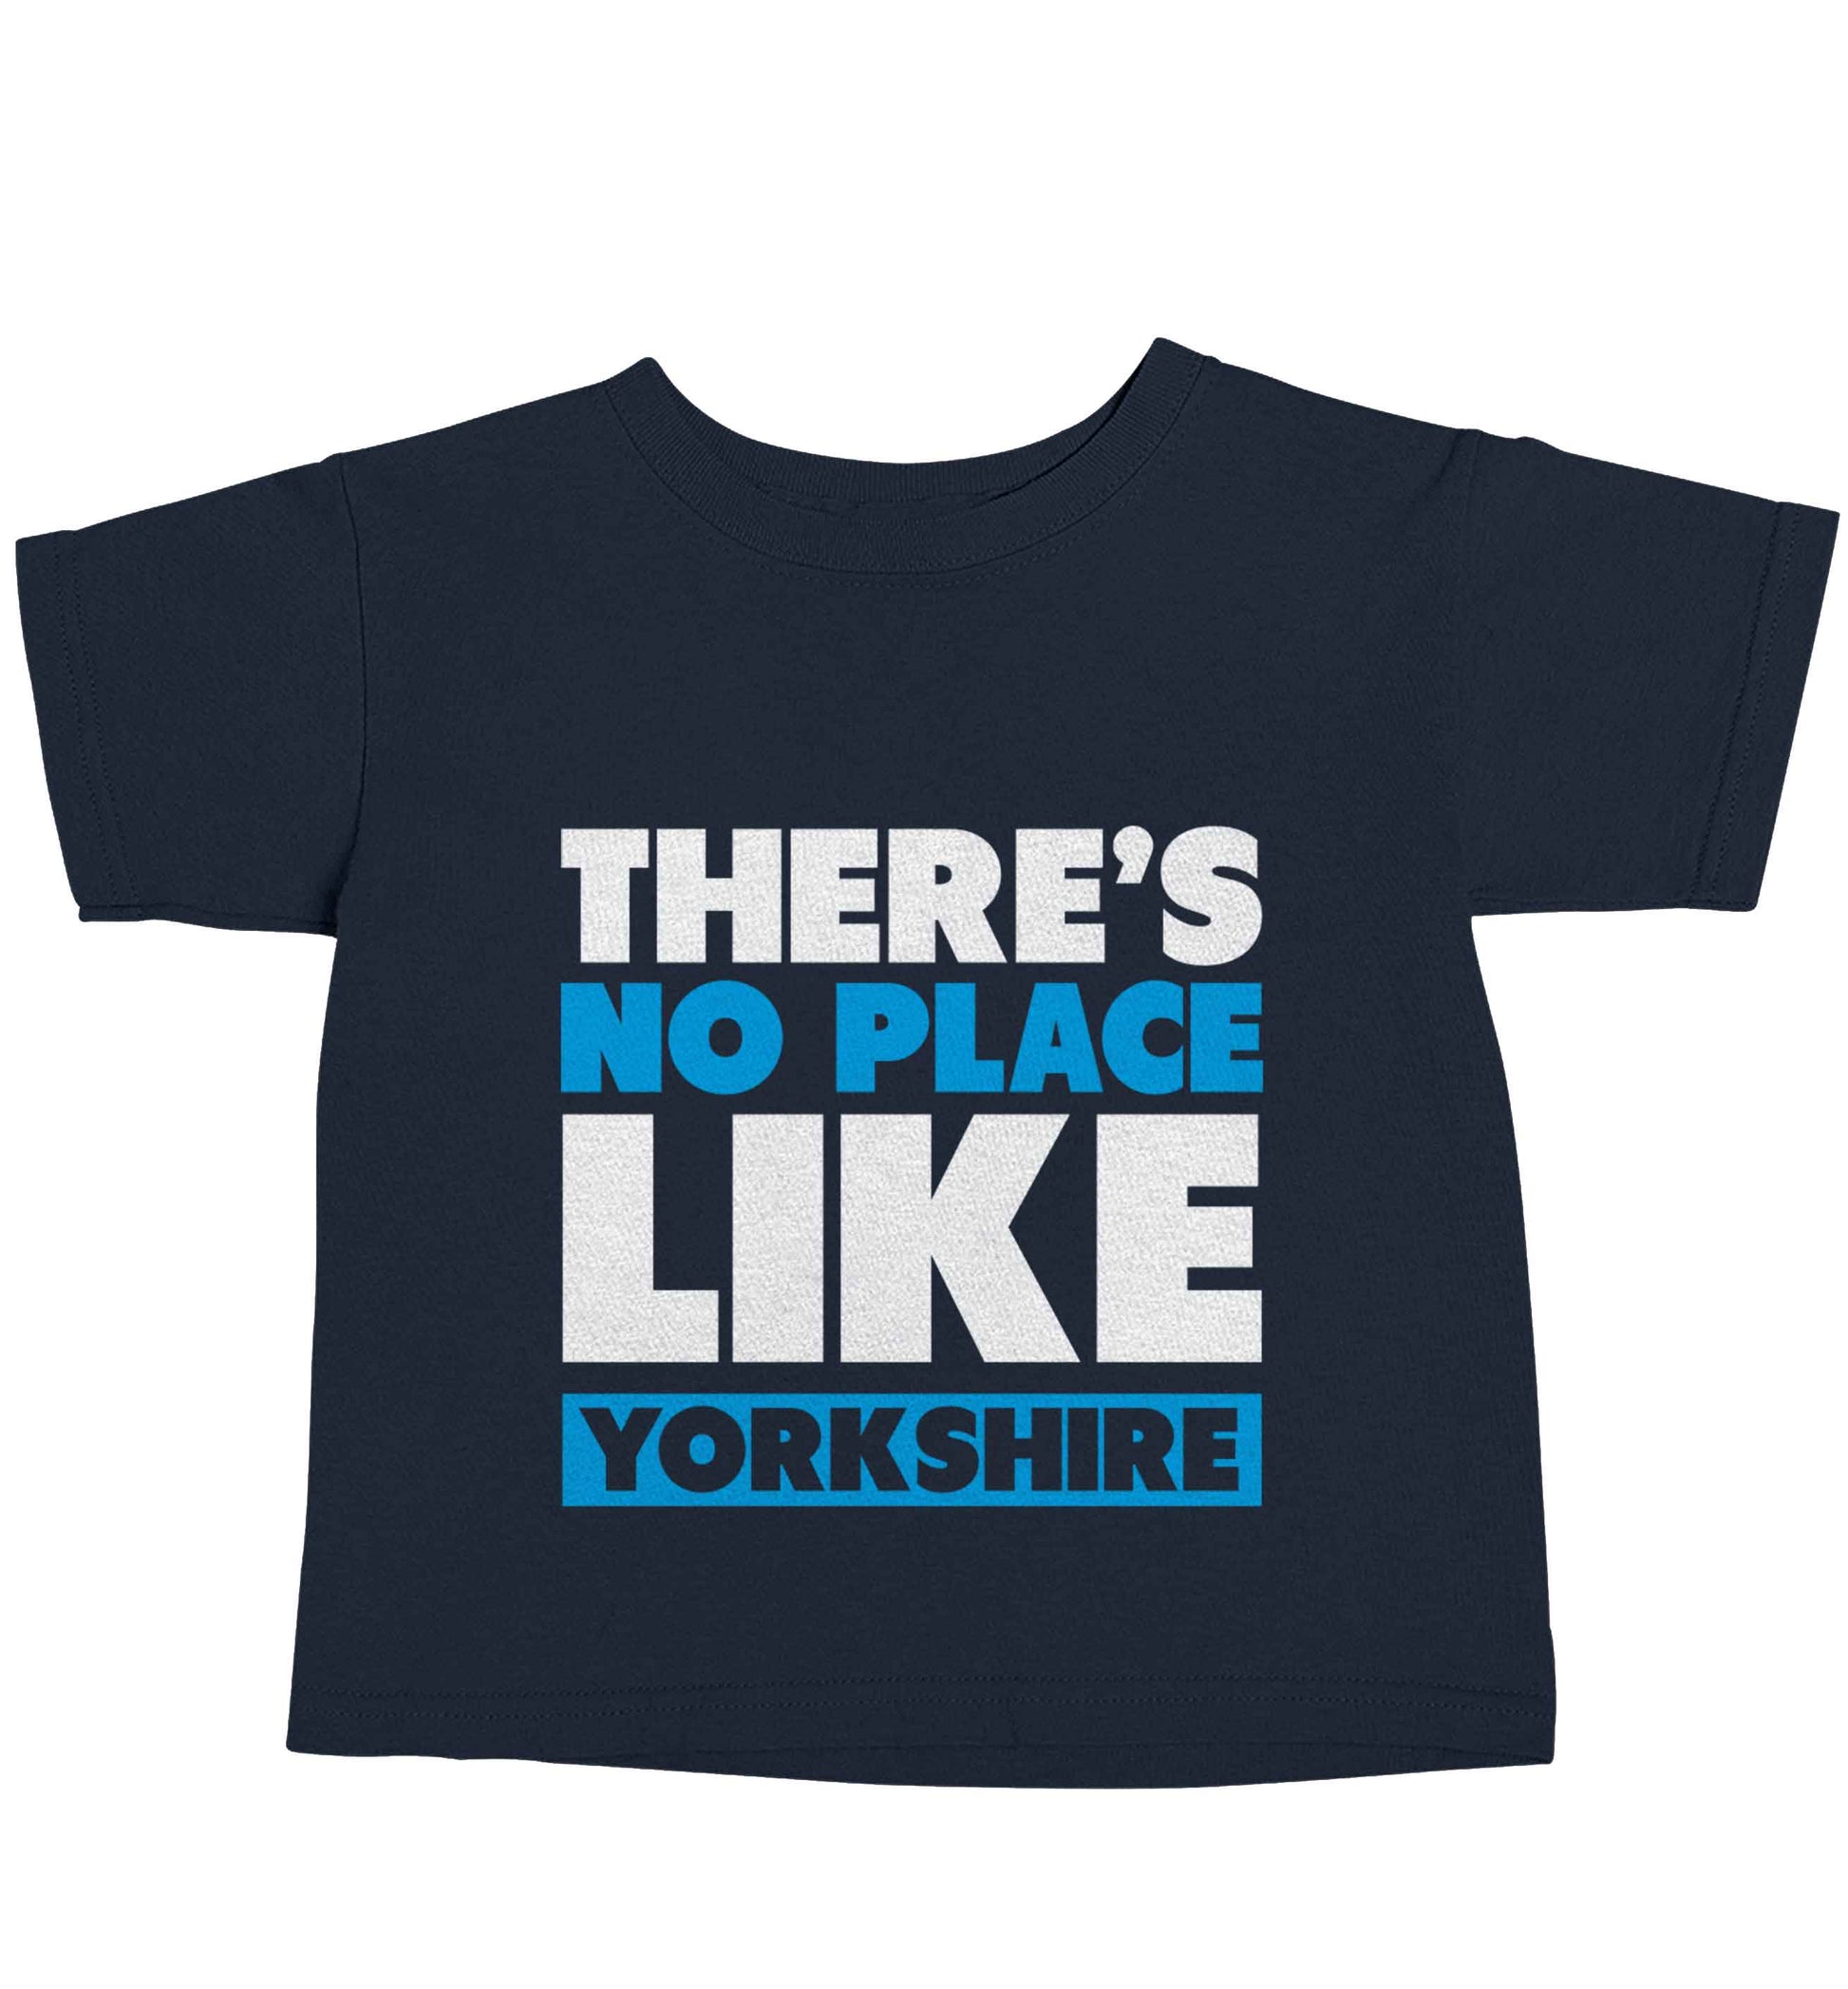 There's no place like Yorkshire navy baby toddler Tshirt 2 Years